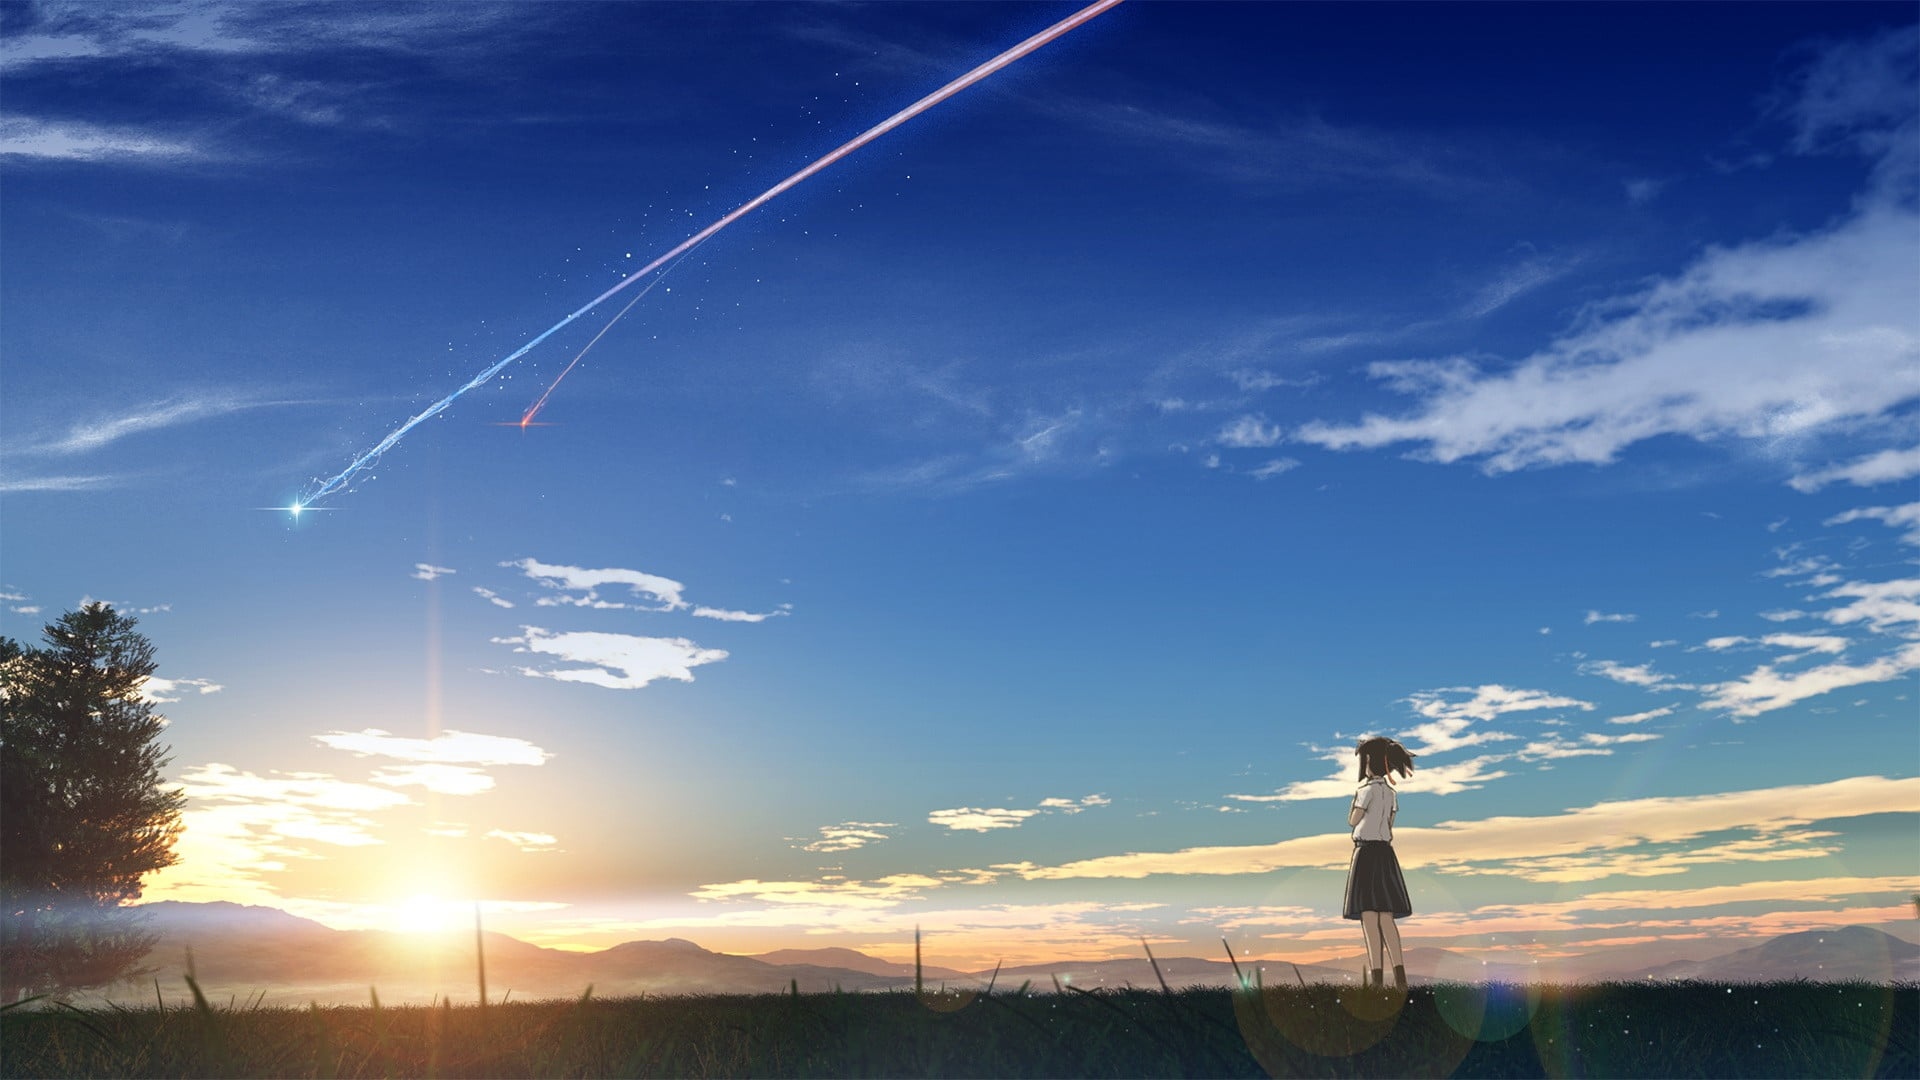 Your Name 4k Wallpapers